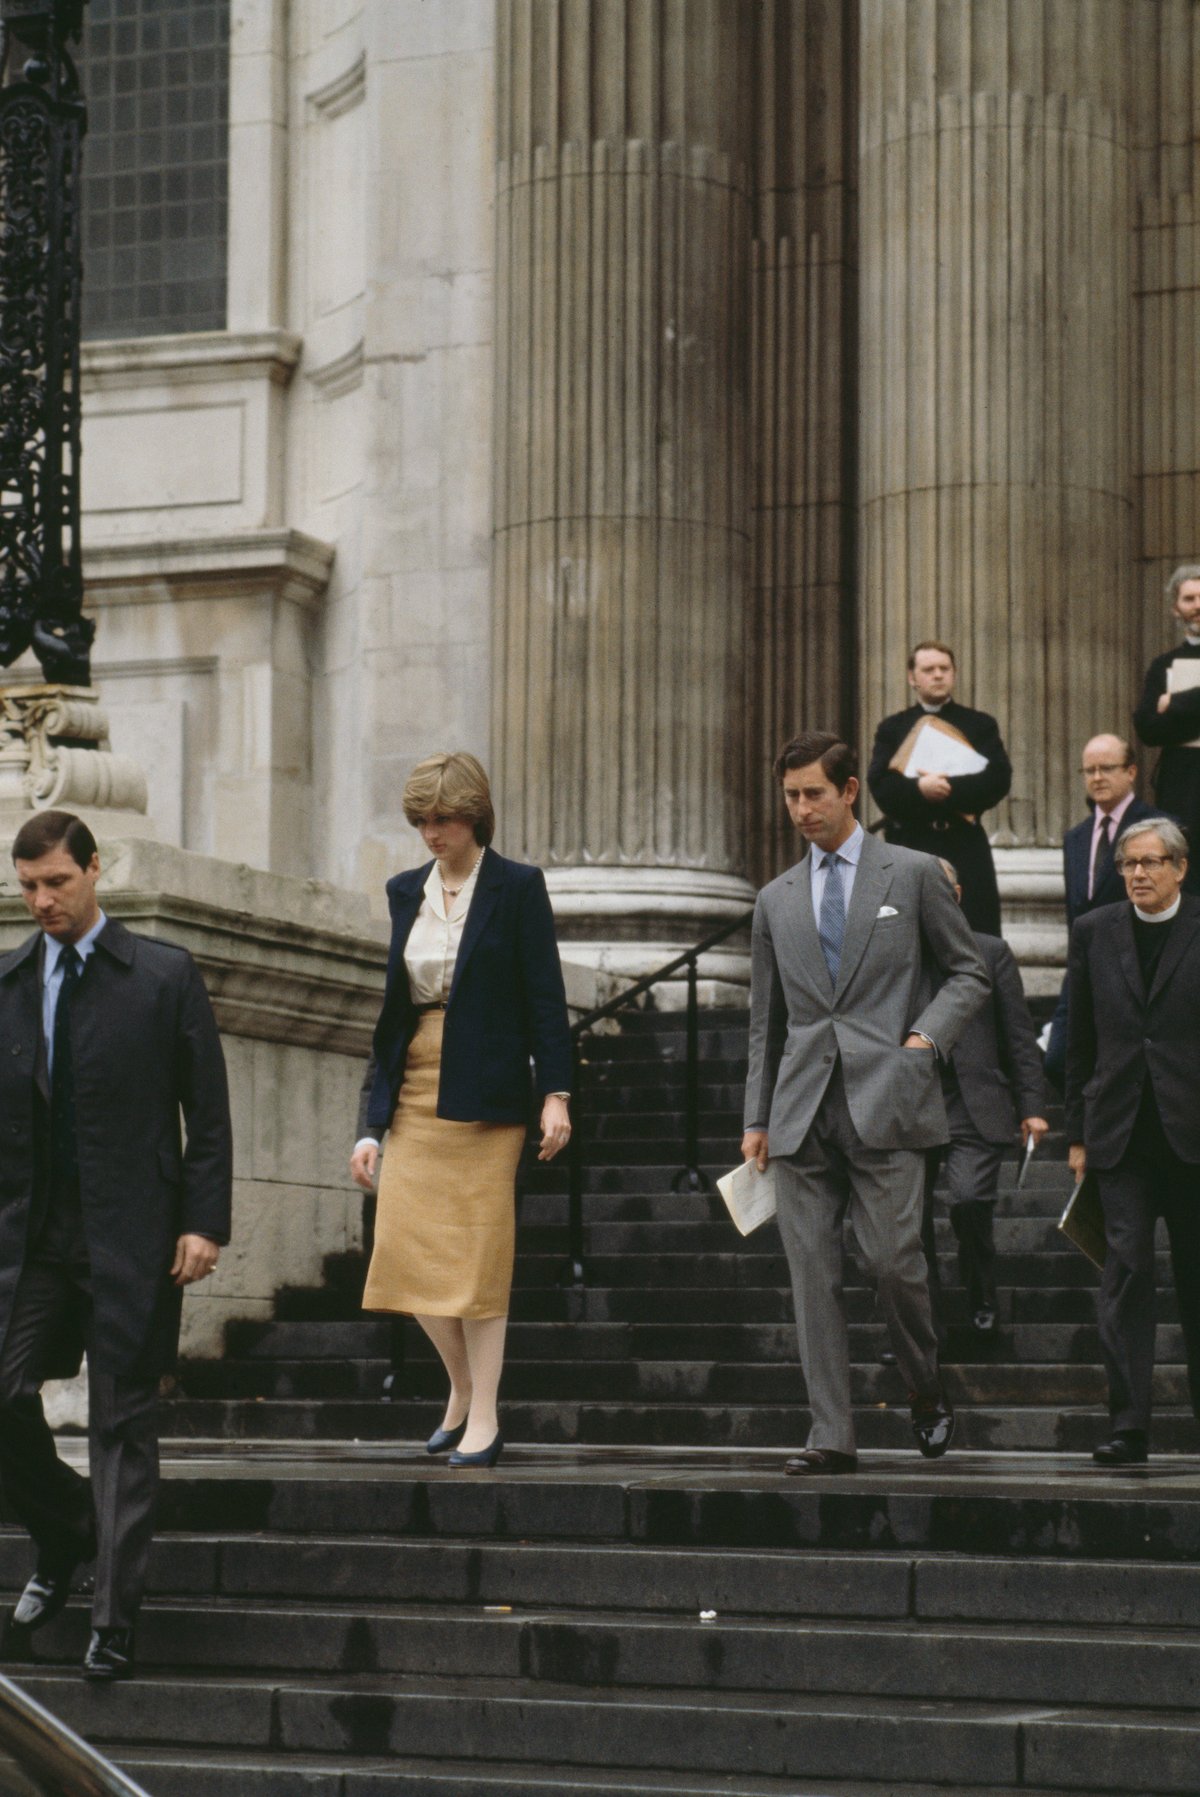 Princess Diana and Prince Charles leave St. Paul's Cathedral after a wedding rehearsal